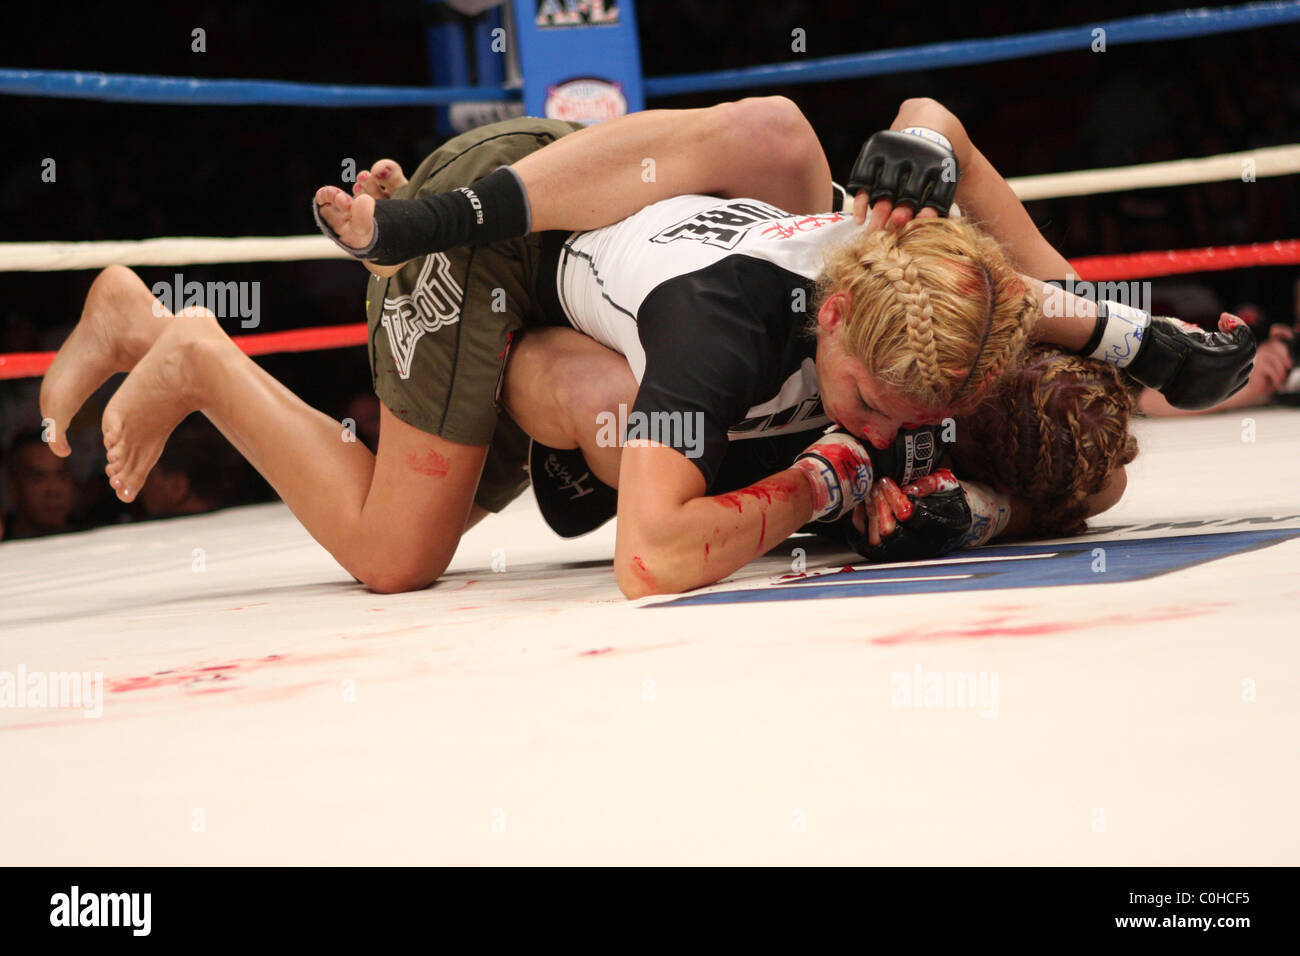 MMA fight between Kim Rose and MMA legend Randy Couture's wife Kimberly in her debut fight at the Thomas and Mack. Kim Rose won Stock Photo